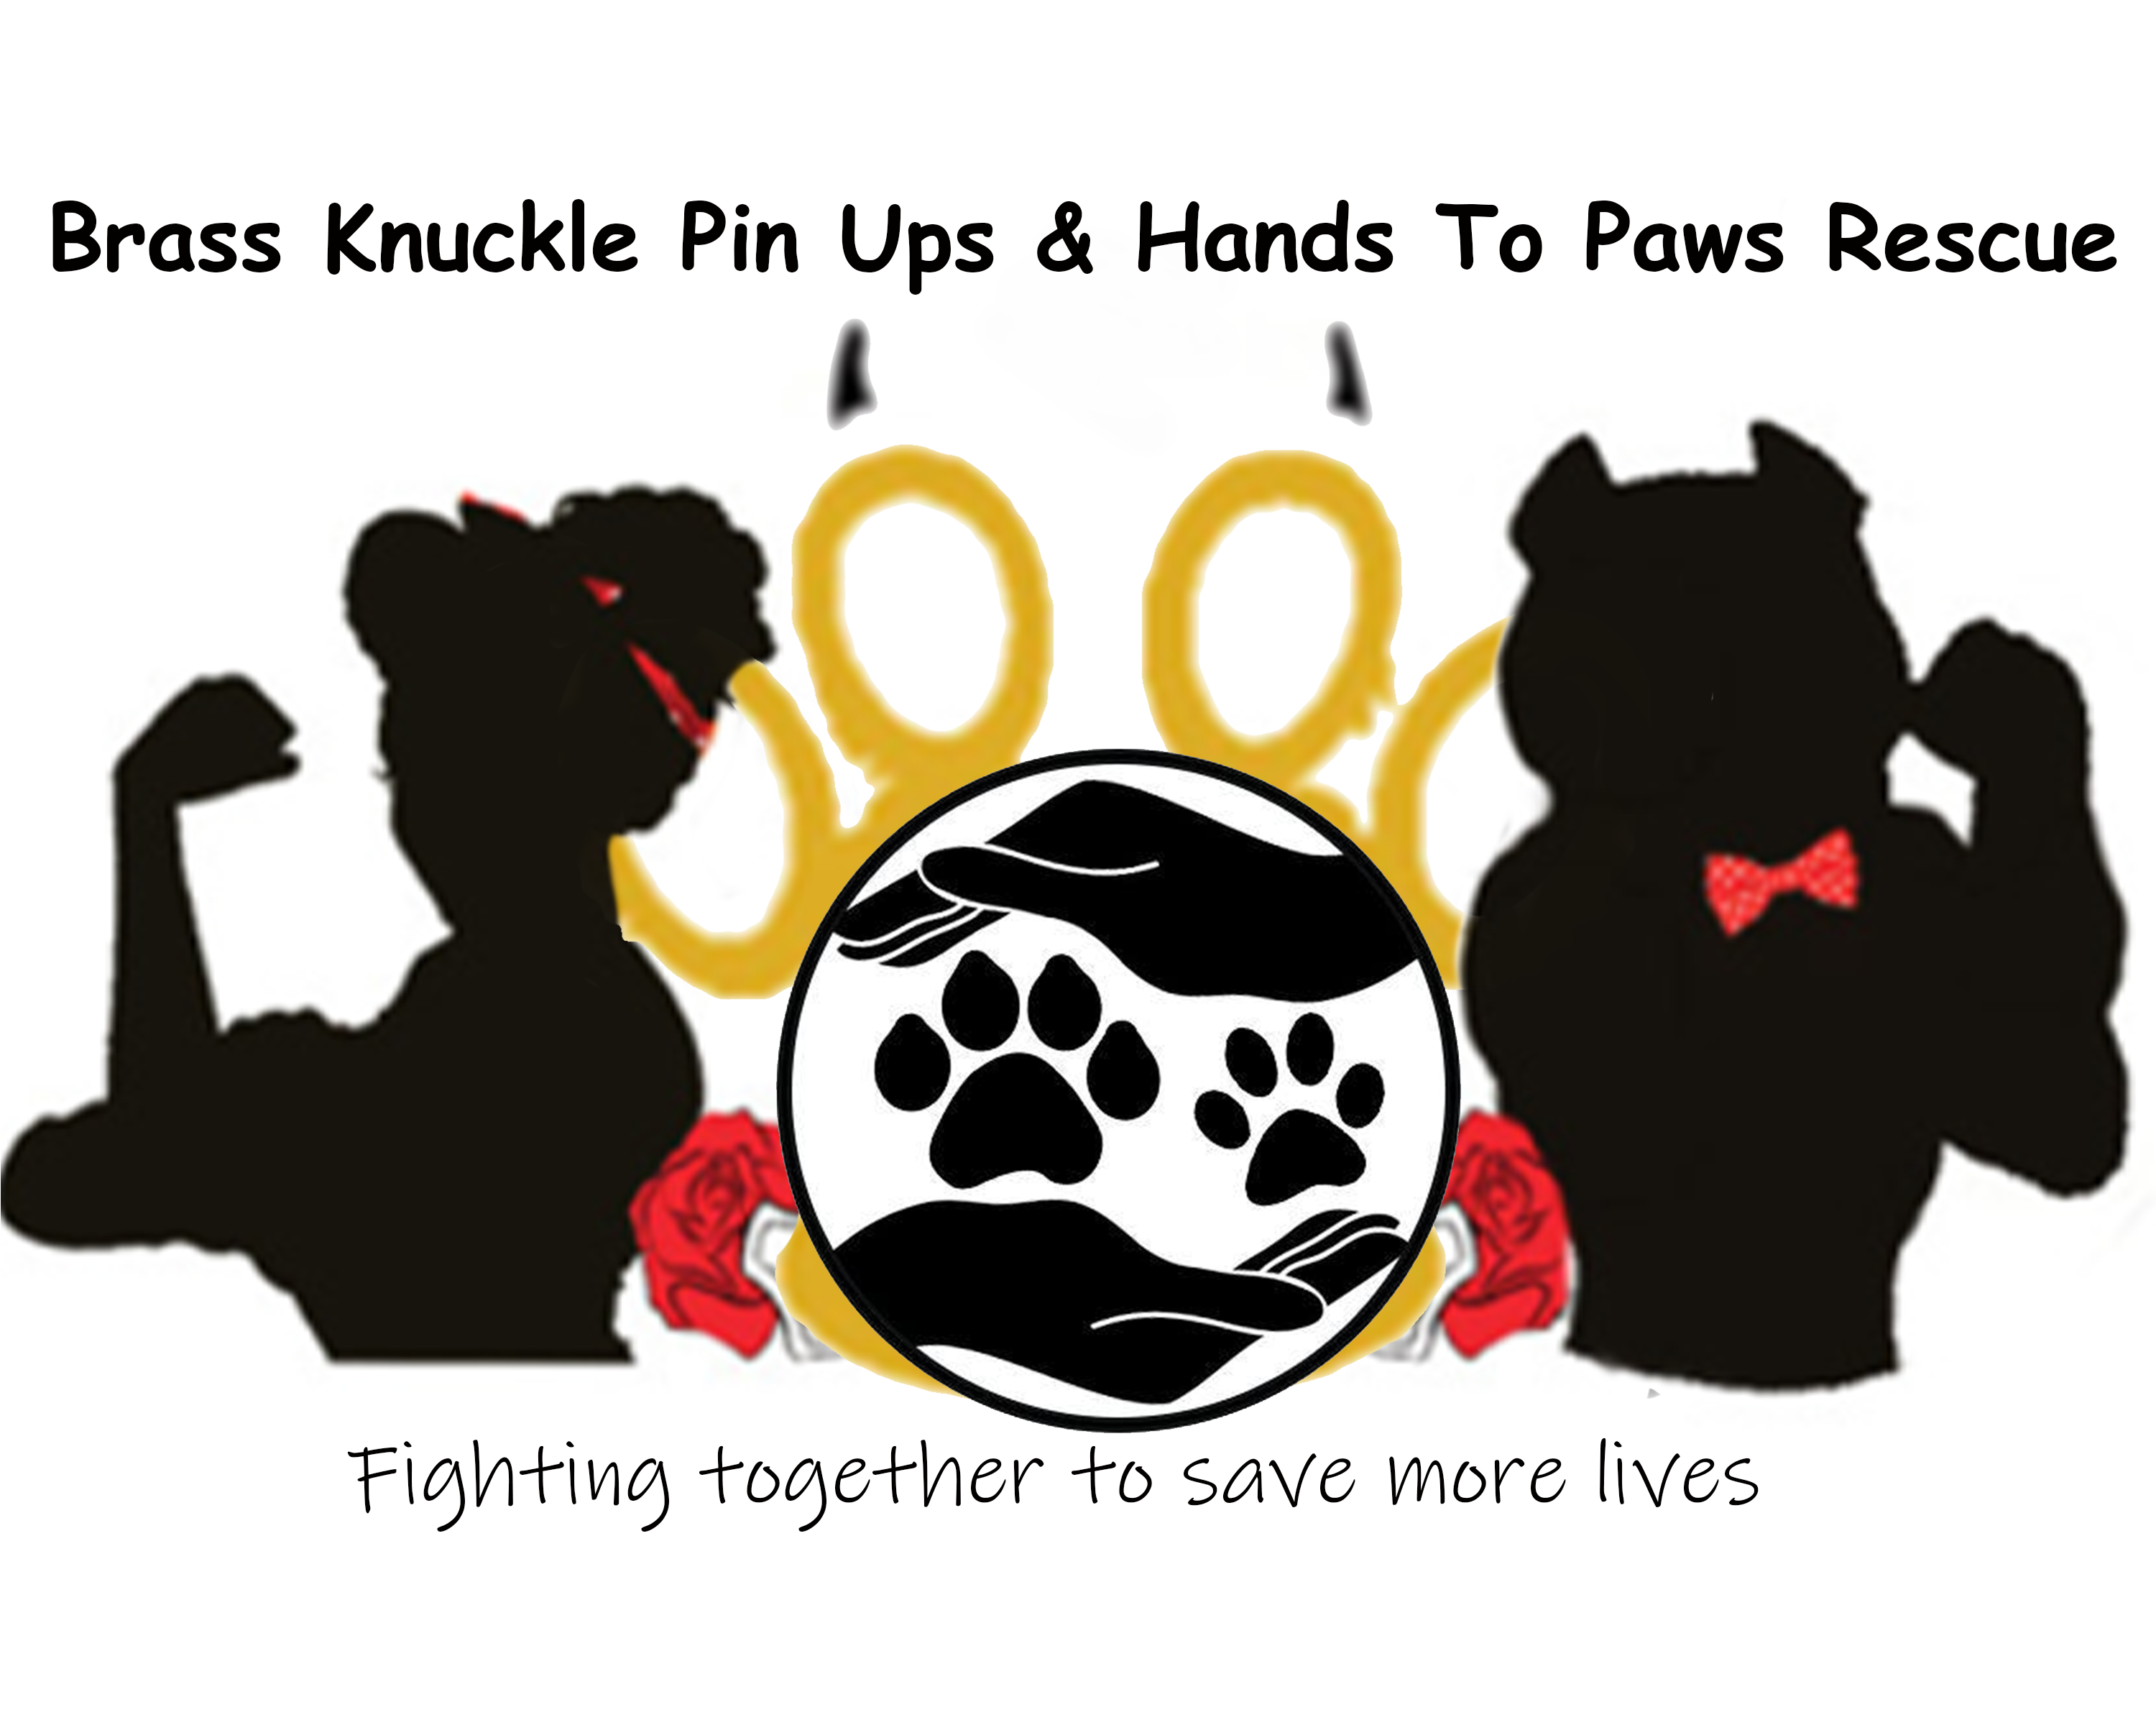 Brass Knuckle Pin Ups Rescue & Hands To Paws Rescue